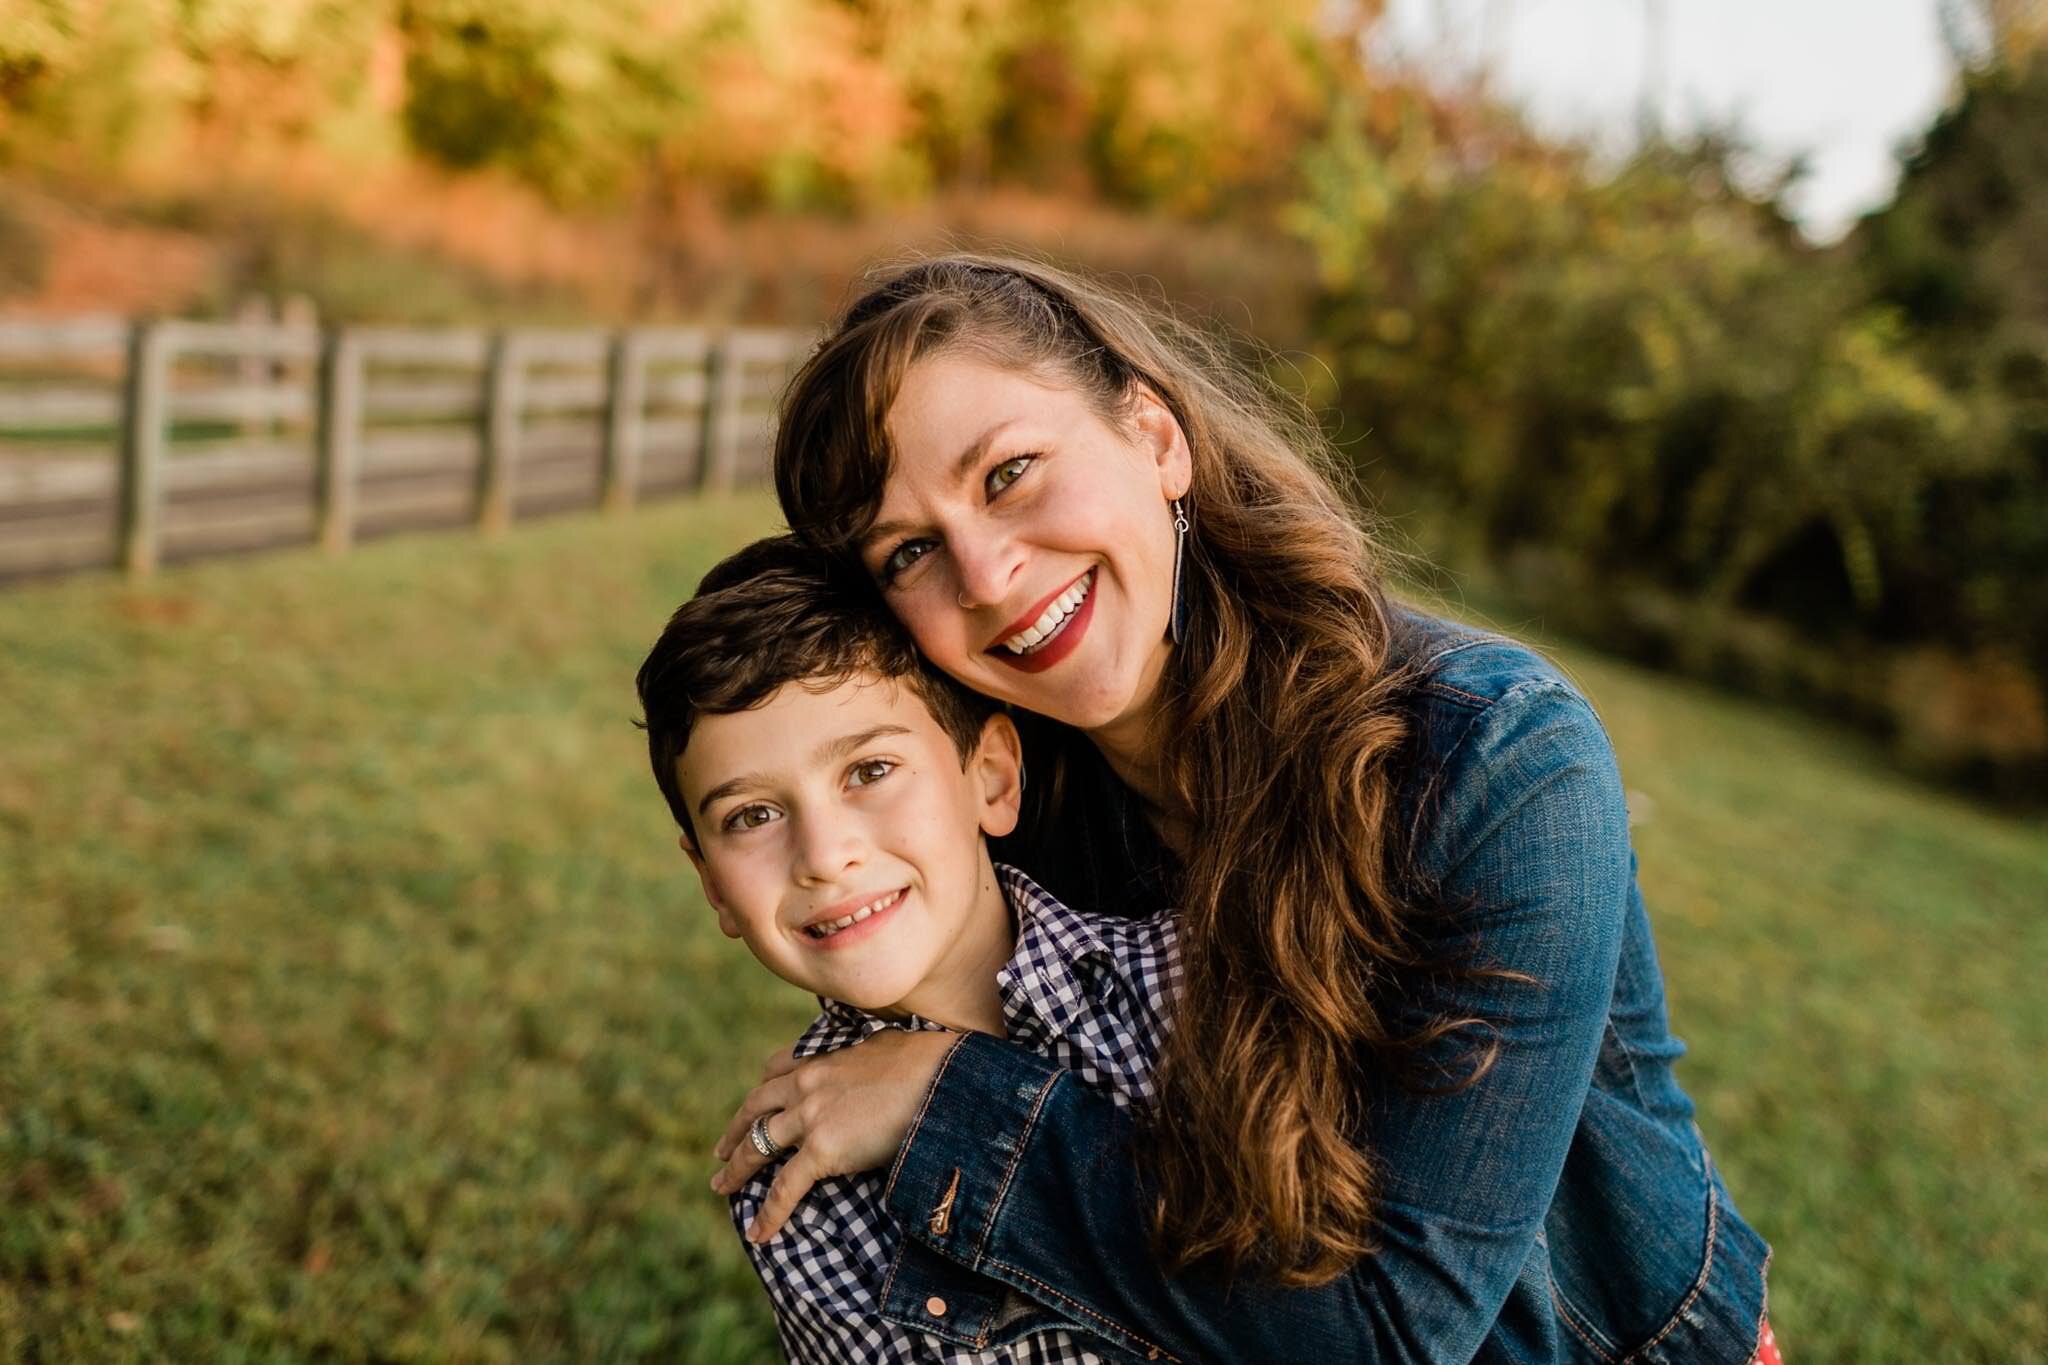 Raleigh Family Photographer | By G. Lin Photography | Umstead Park | Mother hugging son and smiling